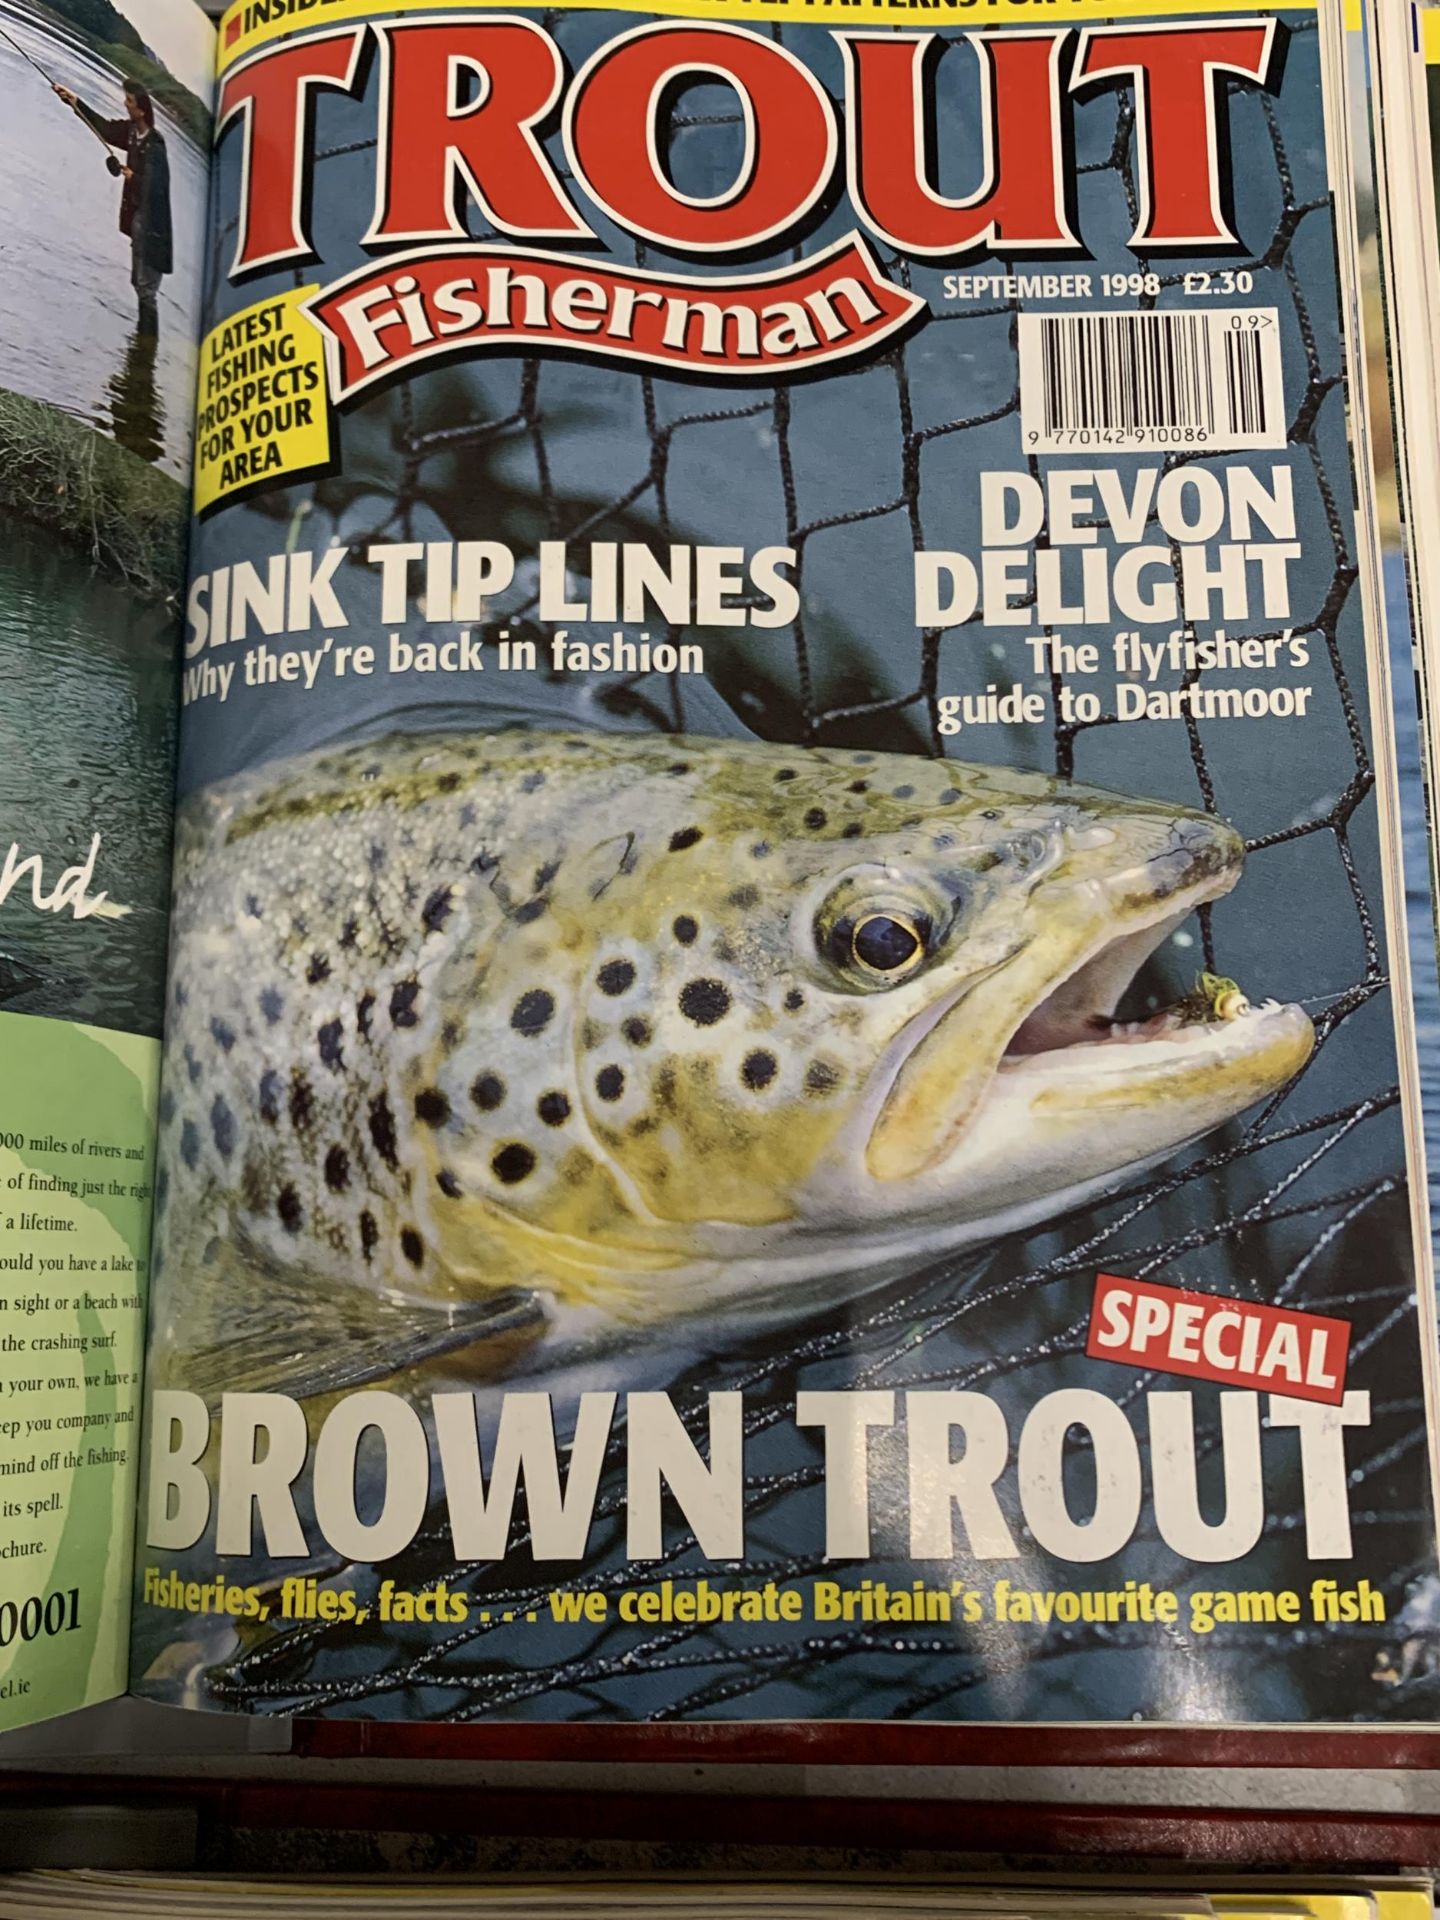 A LARGE COLLECTION OF FISHING MAGAZINES TO INCLUDE "TROUT FISHERMAN" AND "FLY FISHING AND FLY TYING" - Bild 6 aus 6